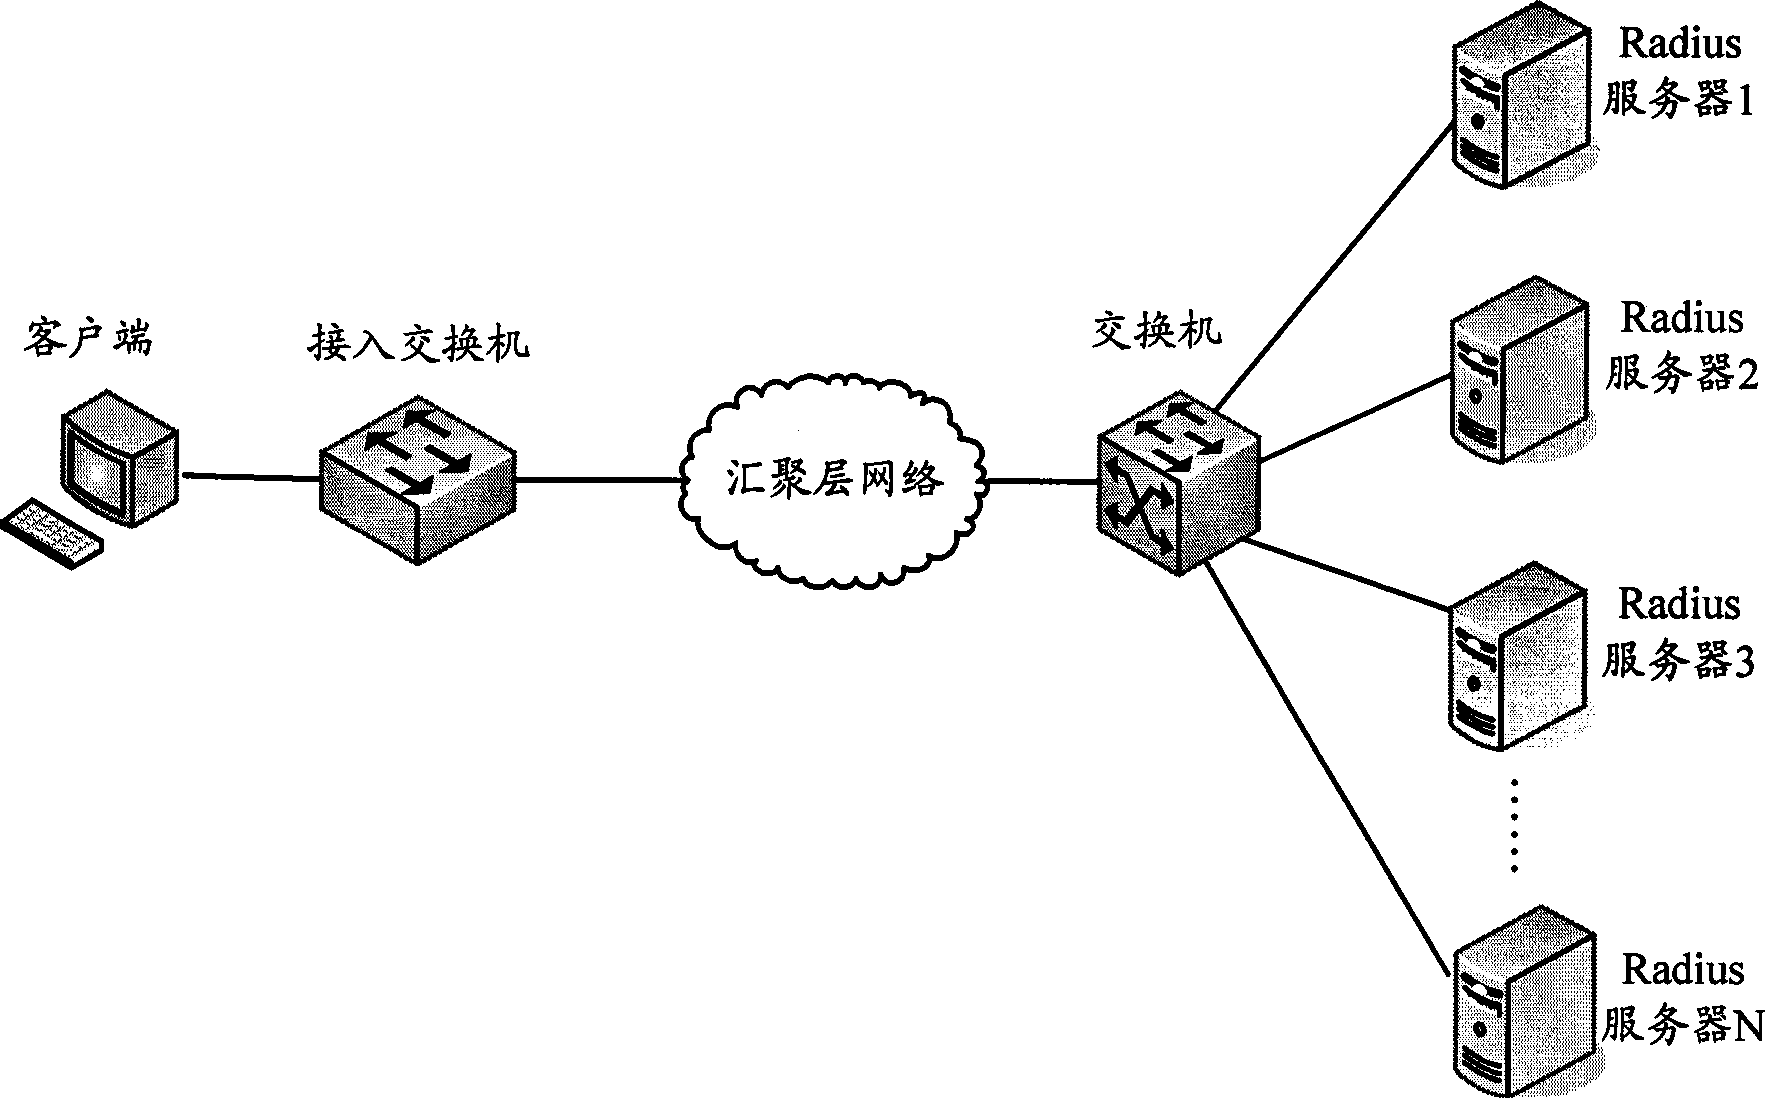 A method and device for realizing oriented processing of certain request